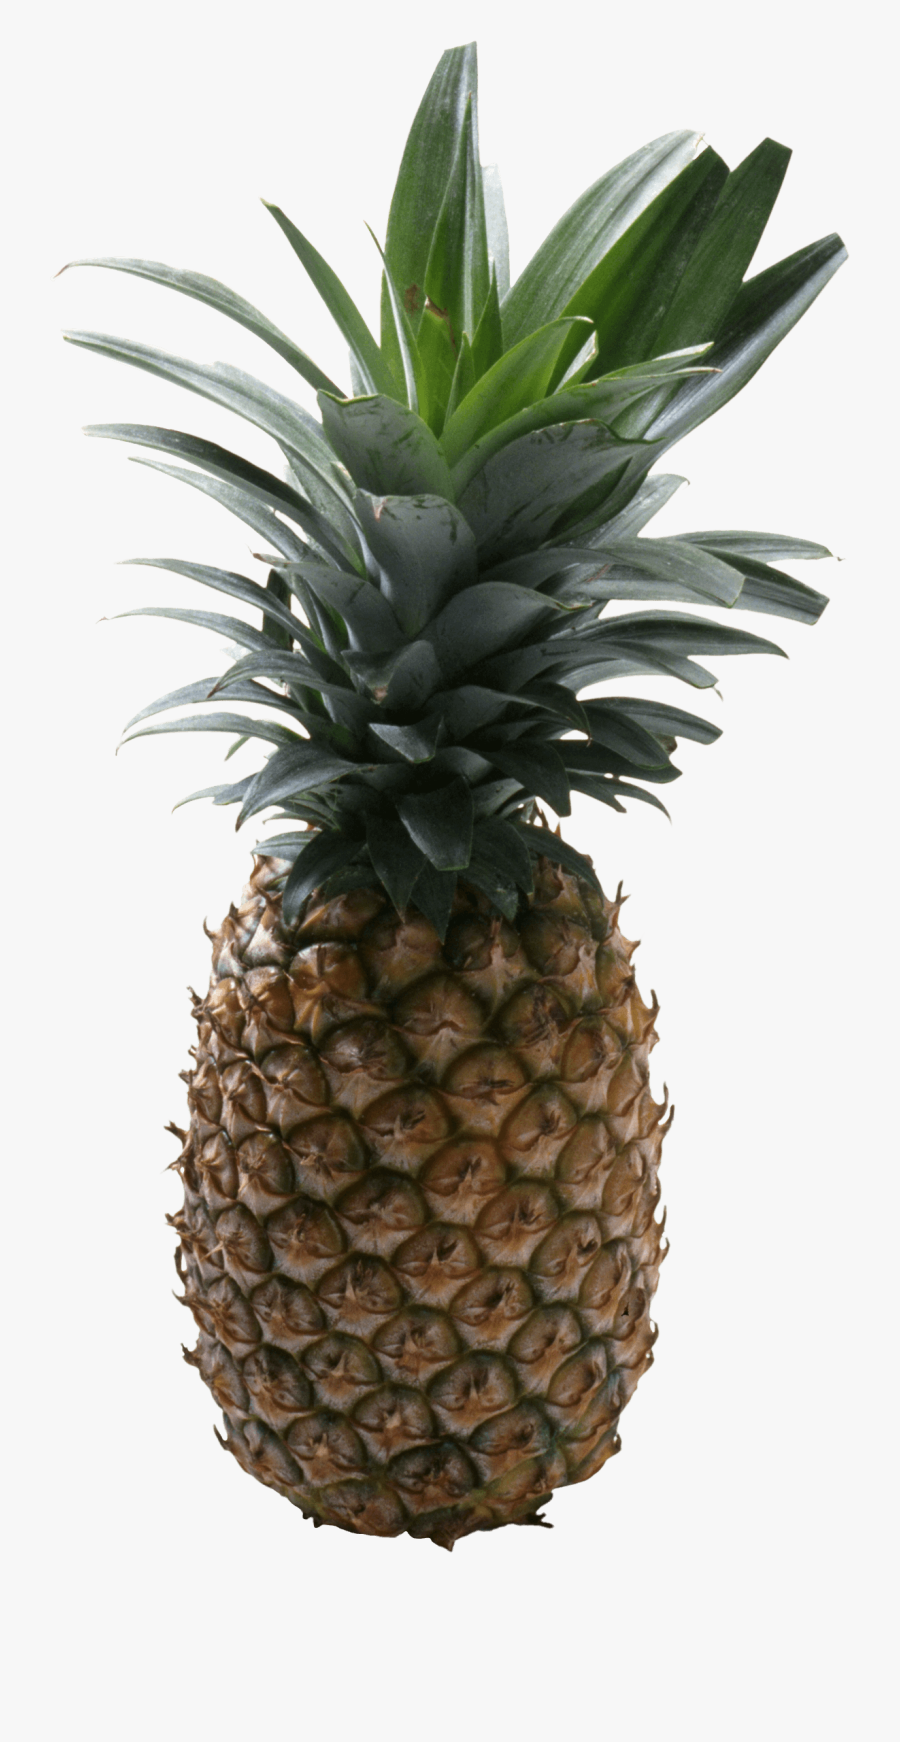 Pineapple Png No Background - Pineapple With No Background, Transparent Clipart